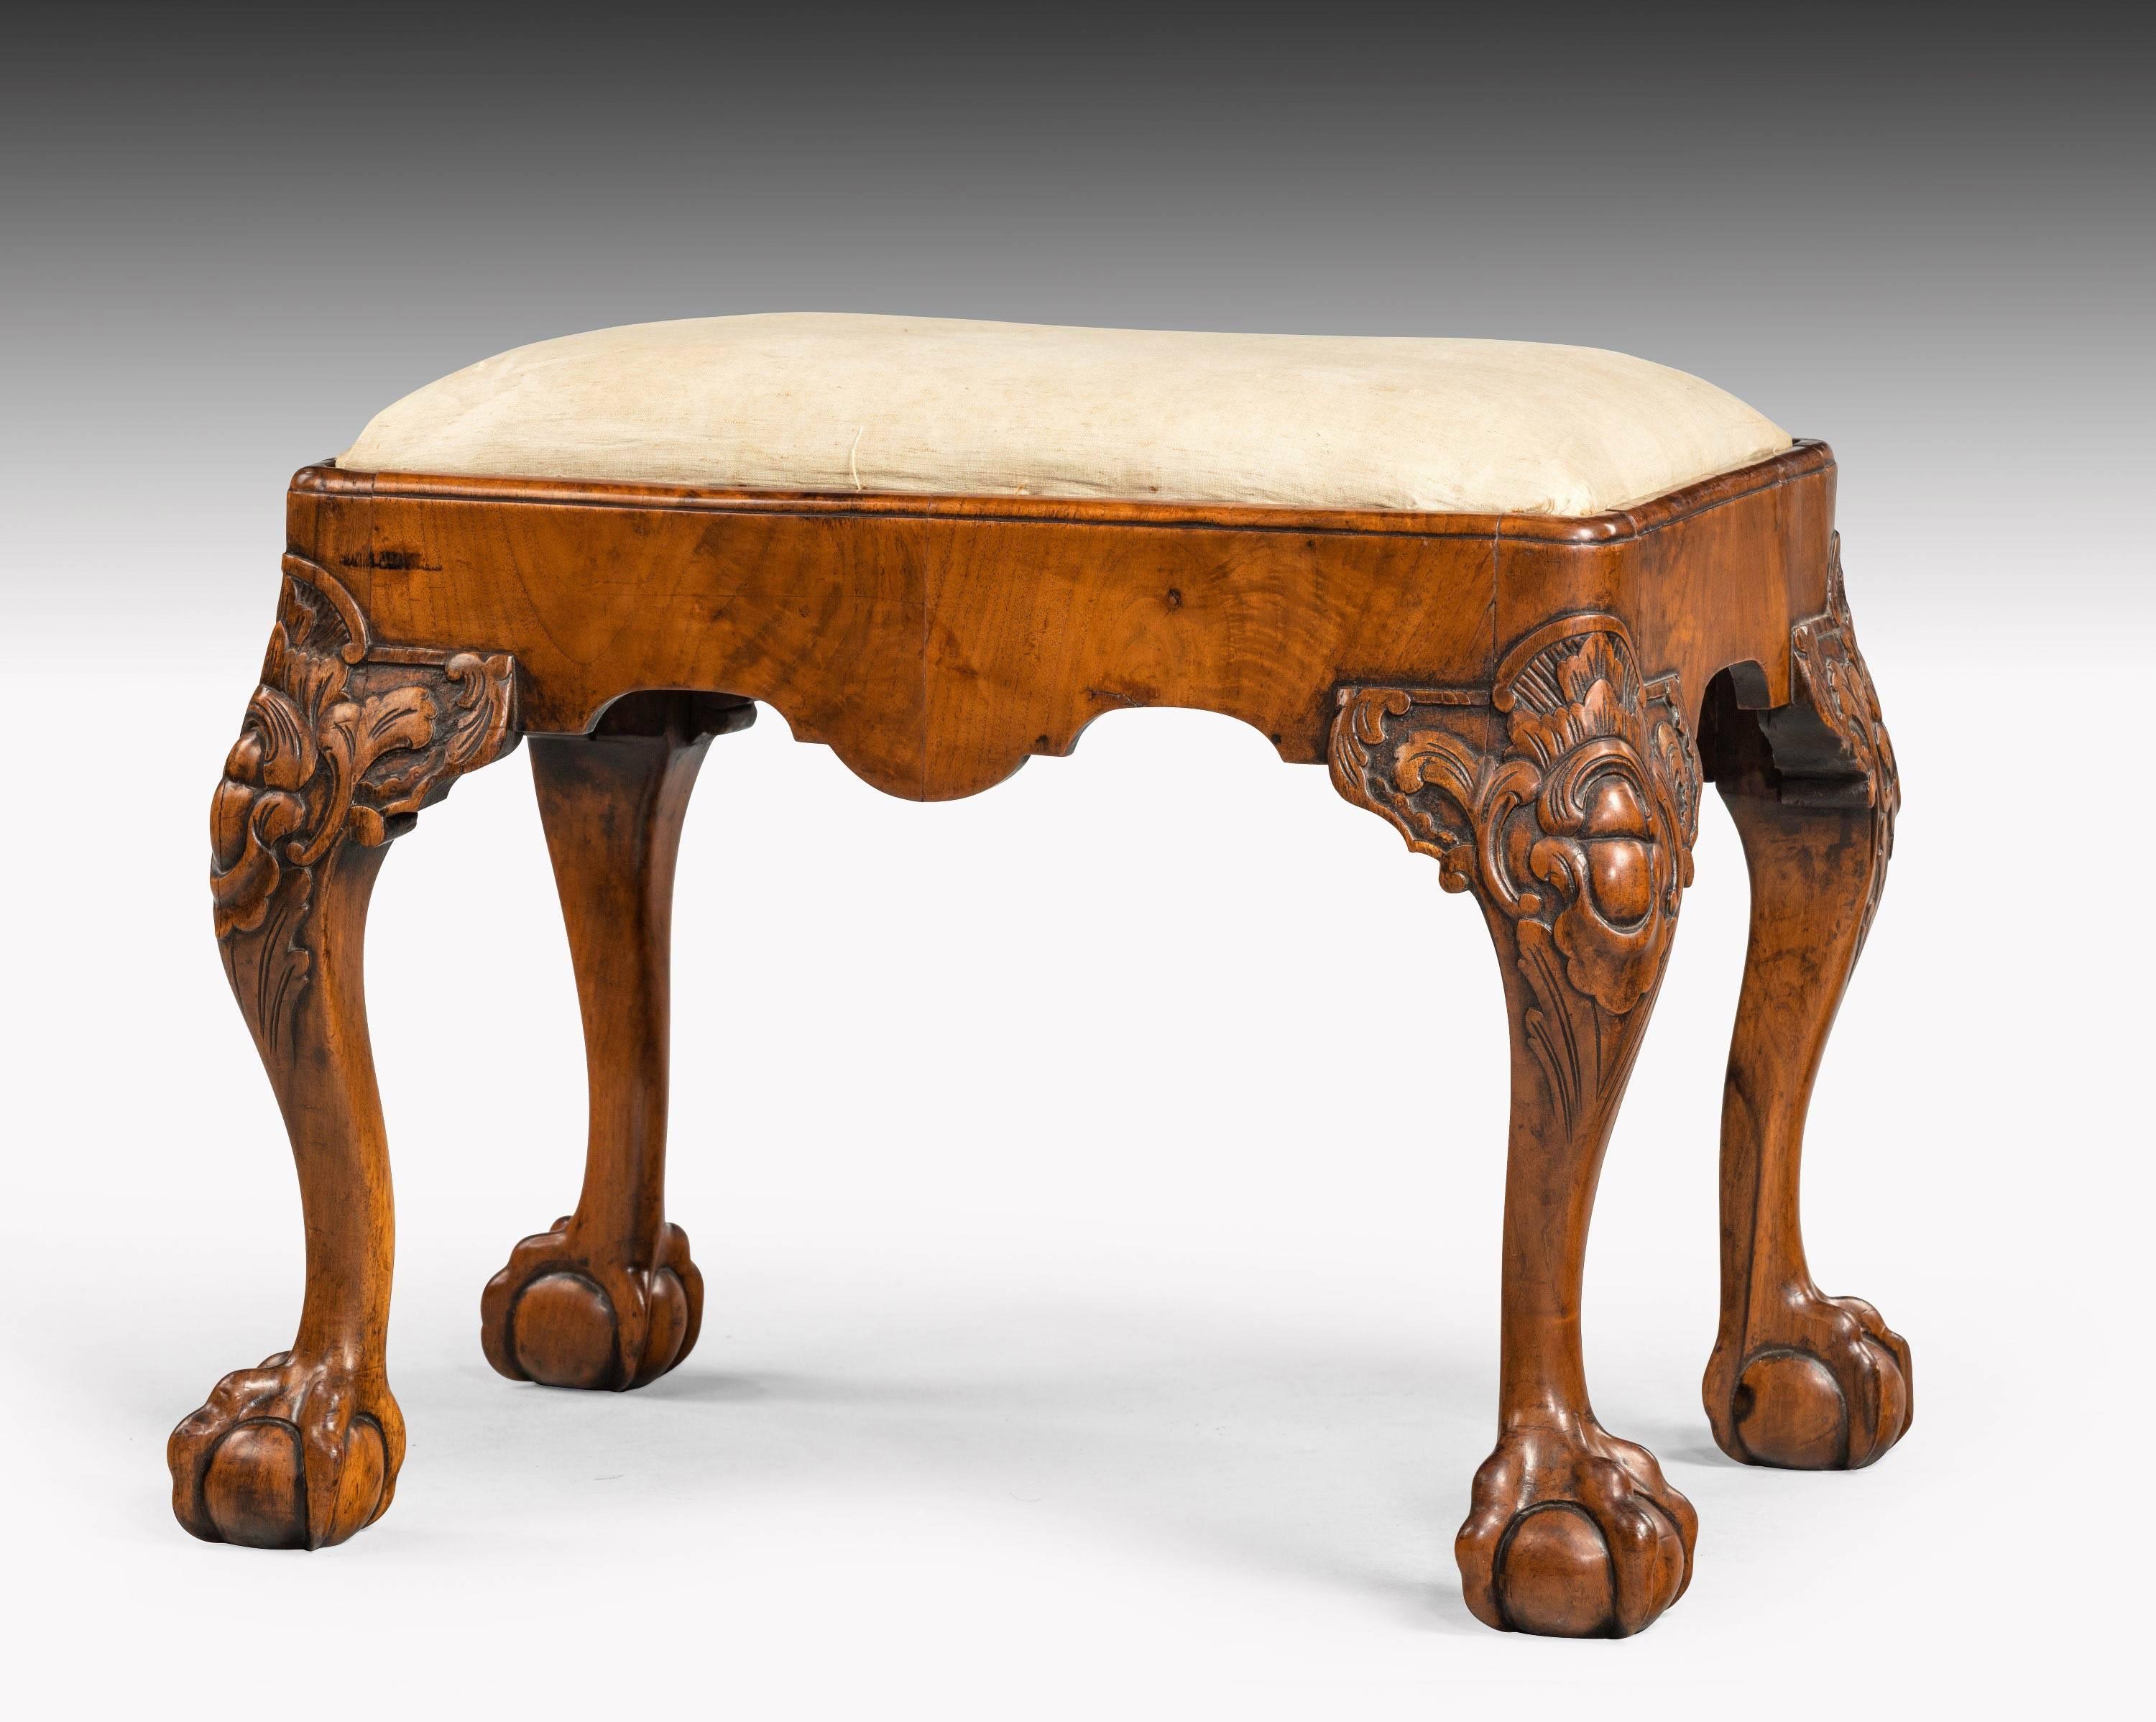 Late 19th Century Finely Carved Mid-18th Century Walnut Stool